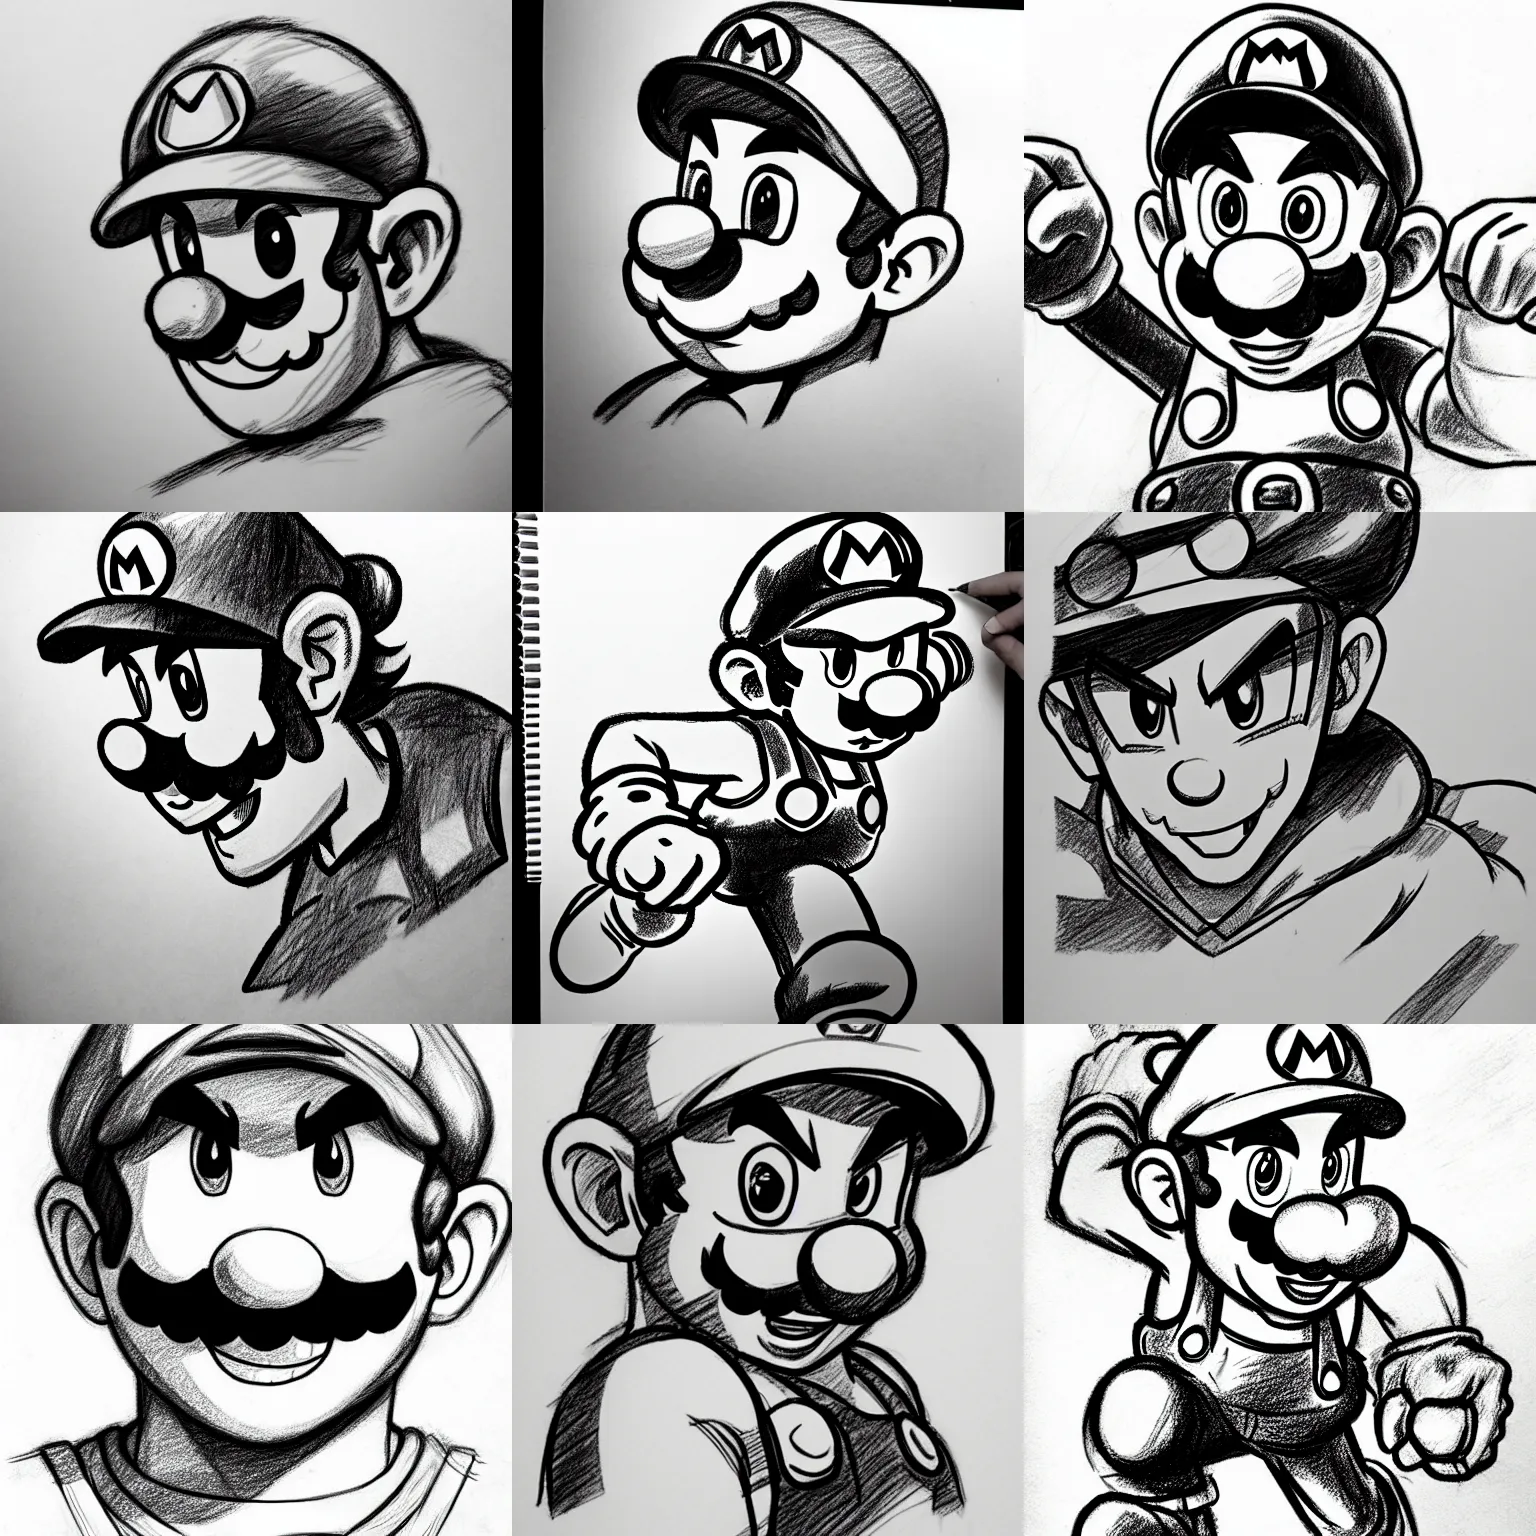 Mario Drawing - How To Draw Mario Step By Step